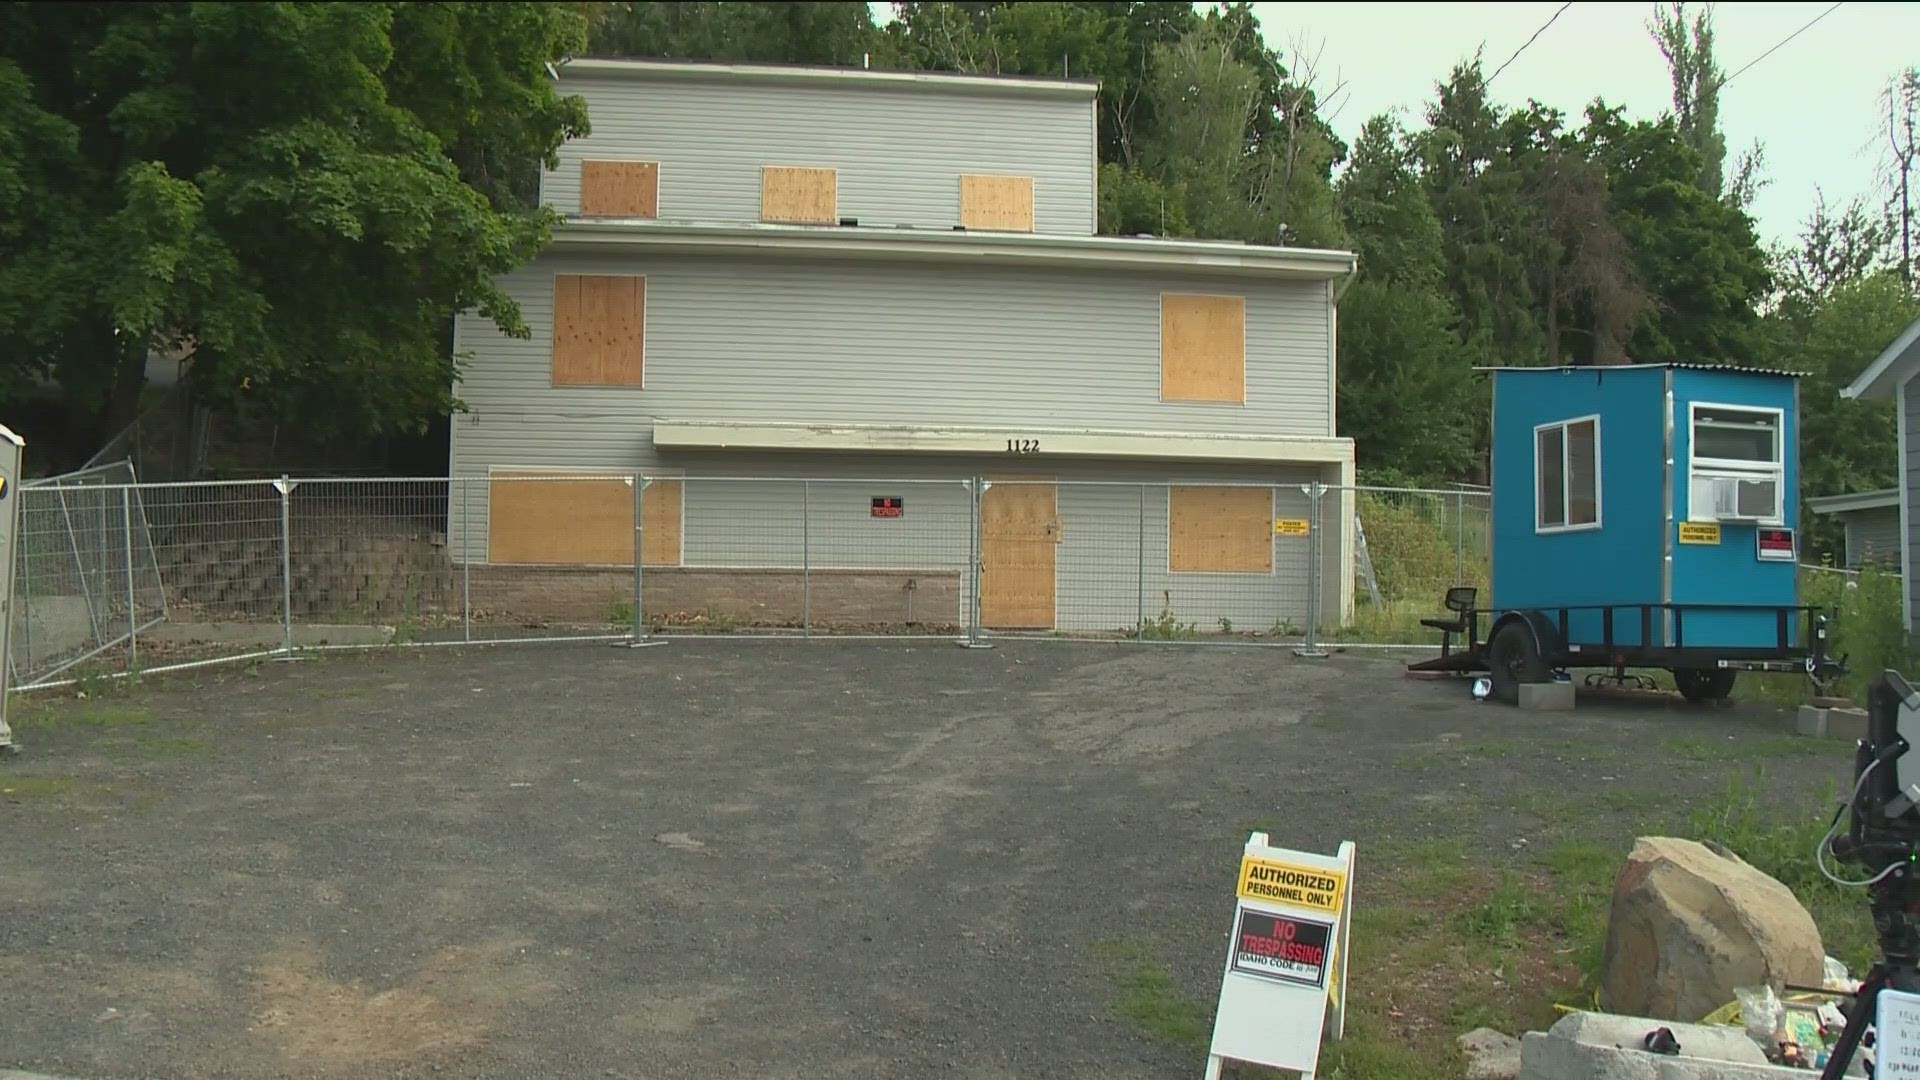 The 1122 King Road home is set to be demolished, but that will be on hold until October, the University of Idaho announced Wednesday.